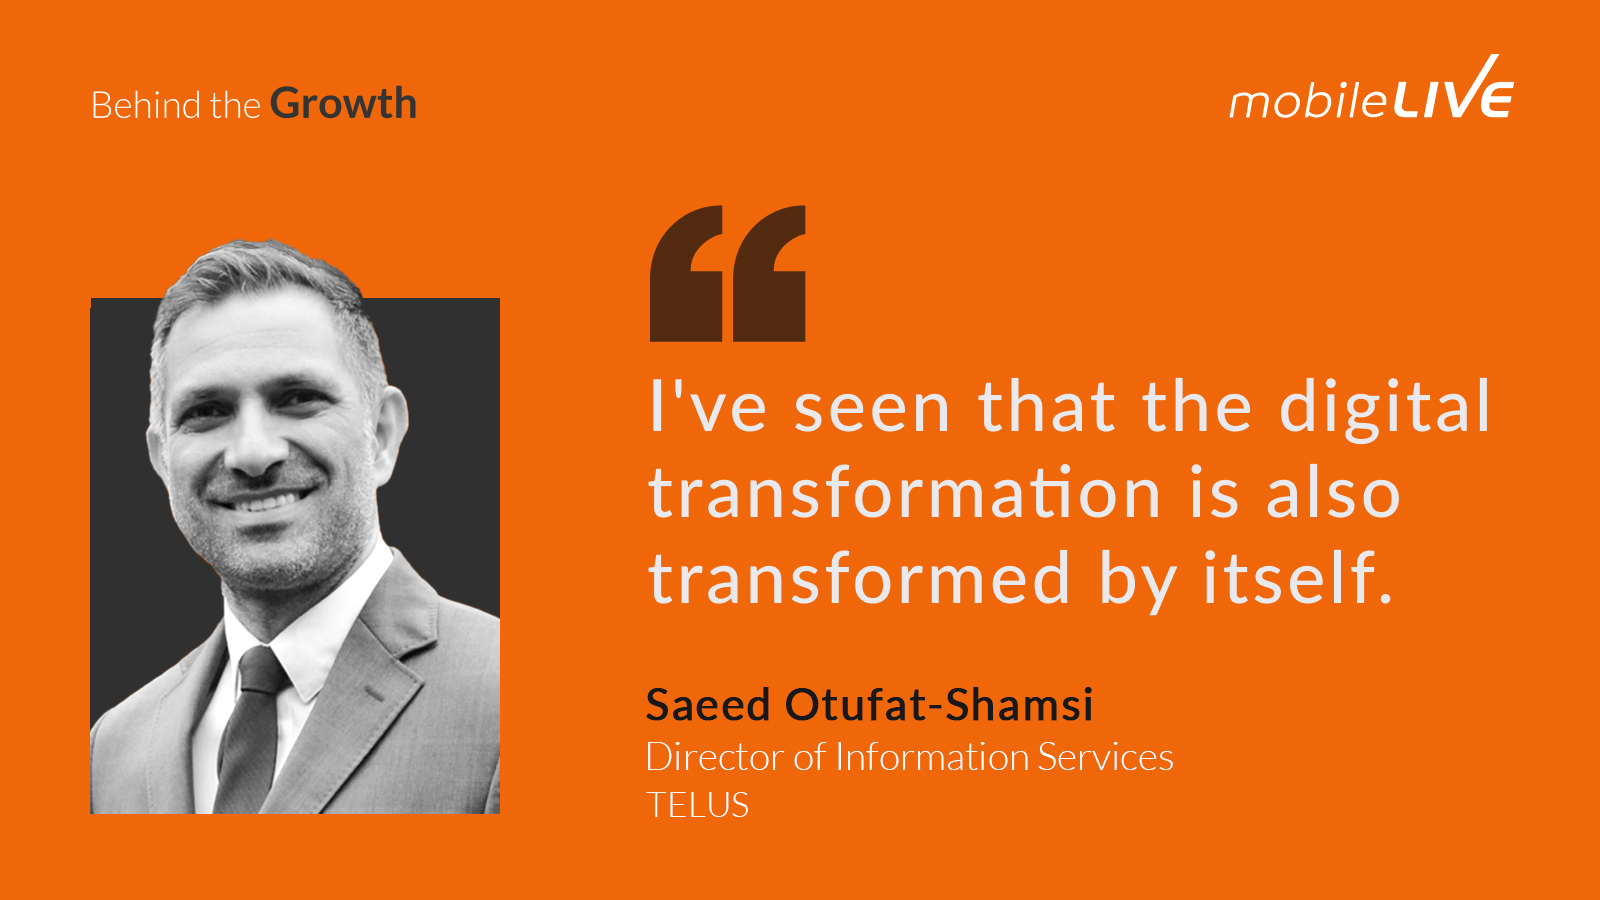 i've seen that the digital transformation is also transformed by itself.